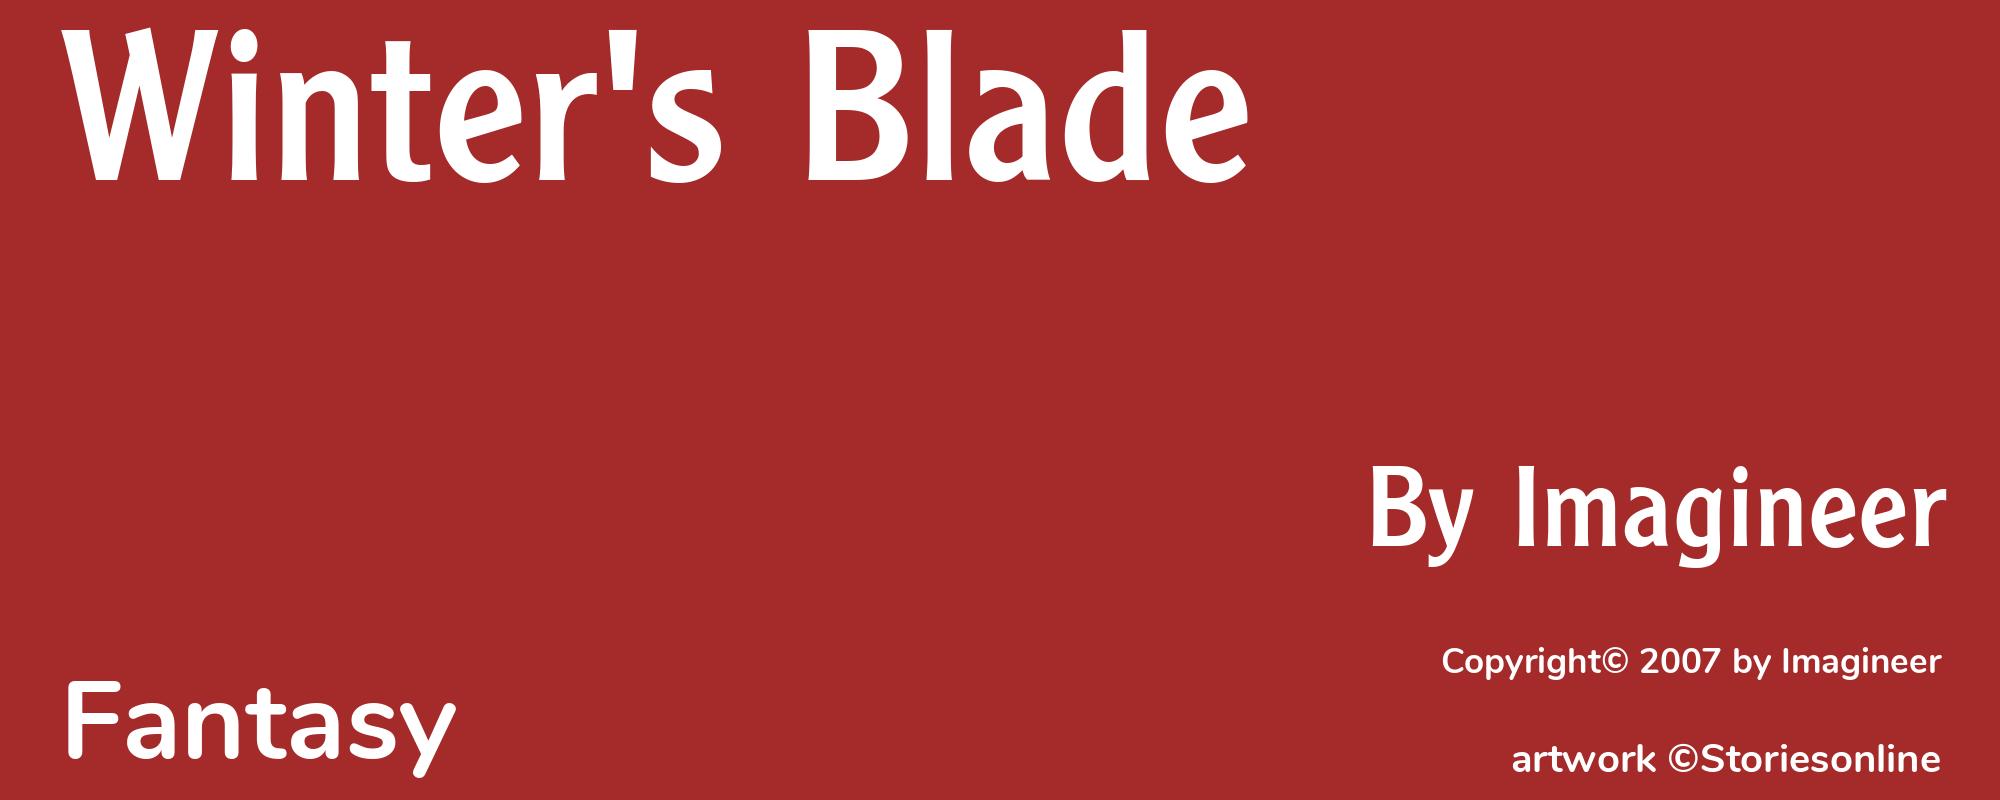 Winter's Blade - Cover